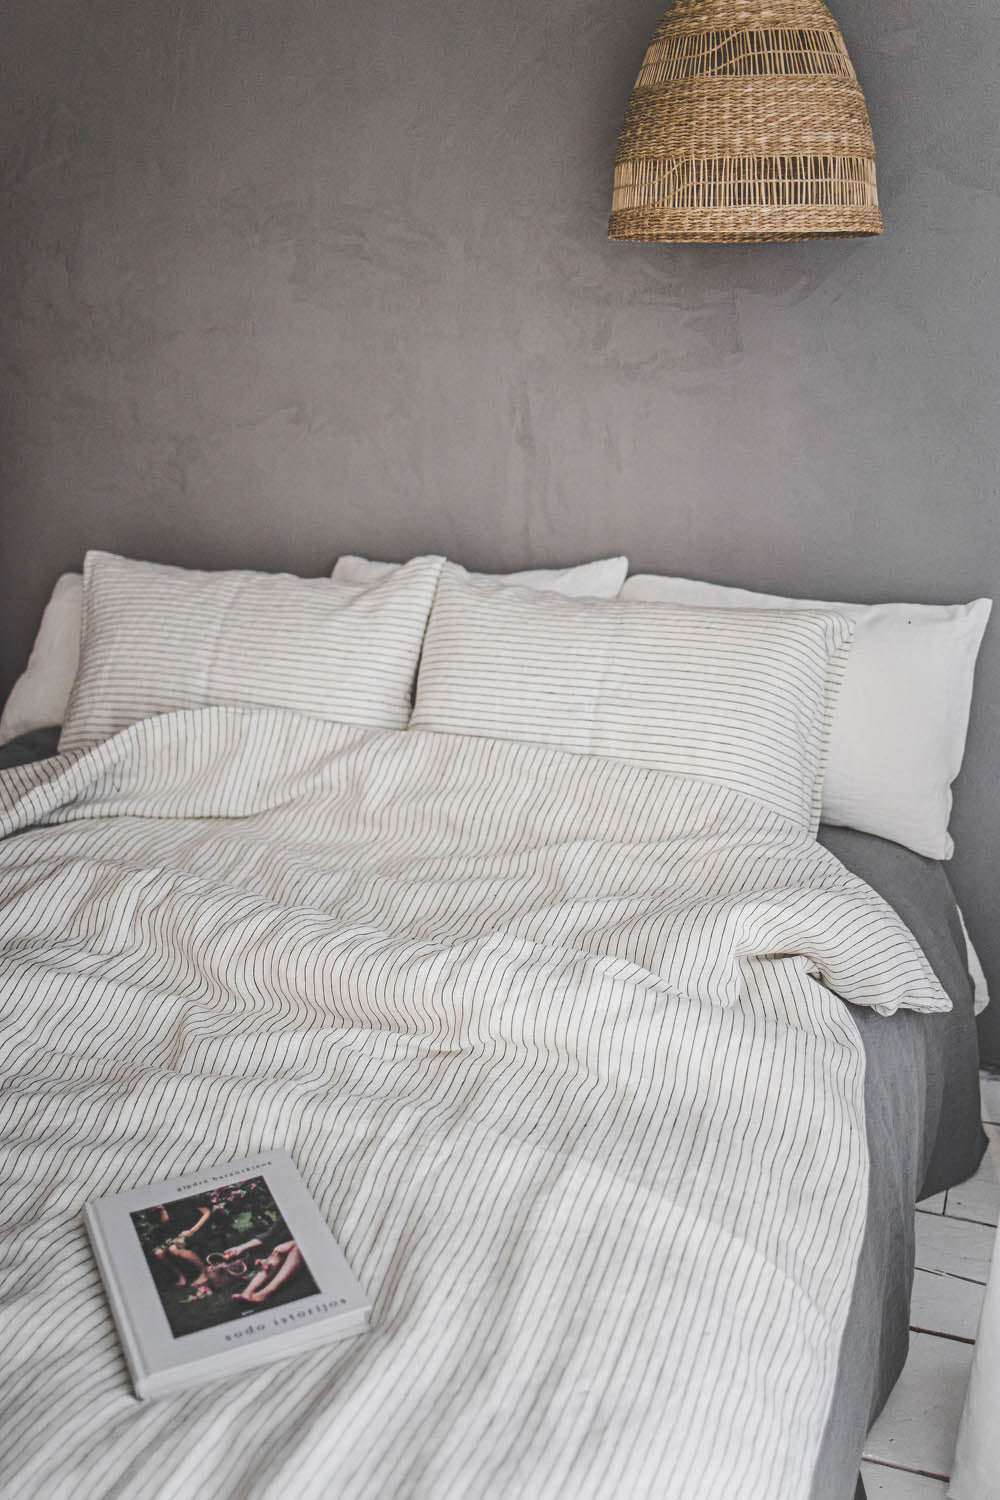 White/black striped linen duvet cover with buttons